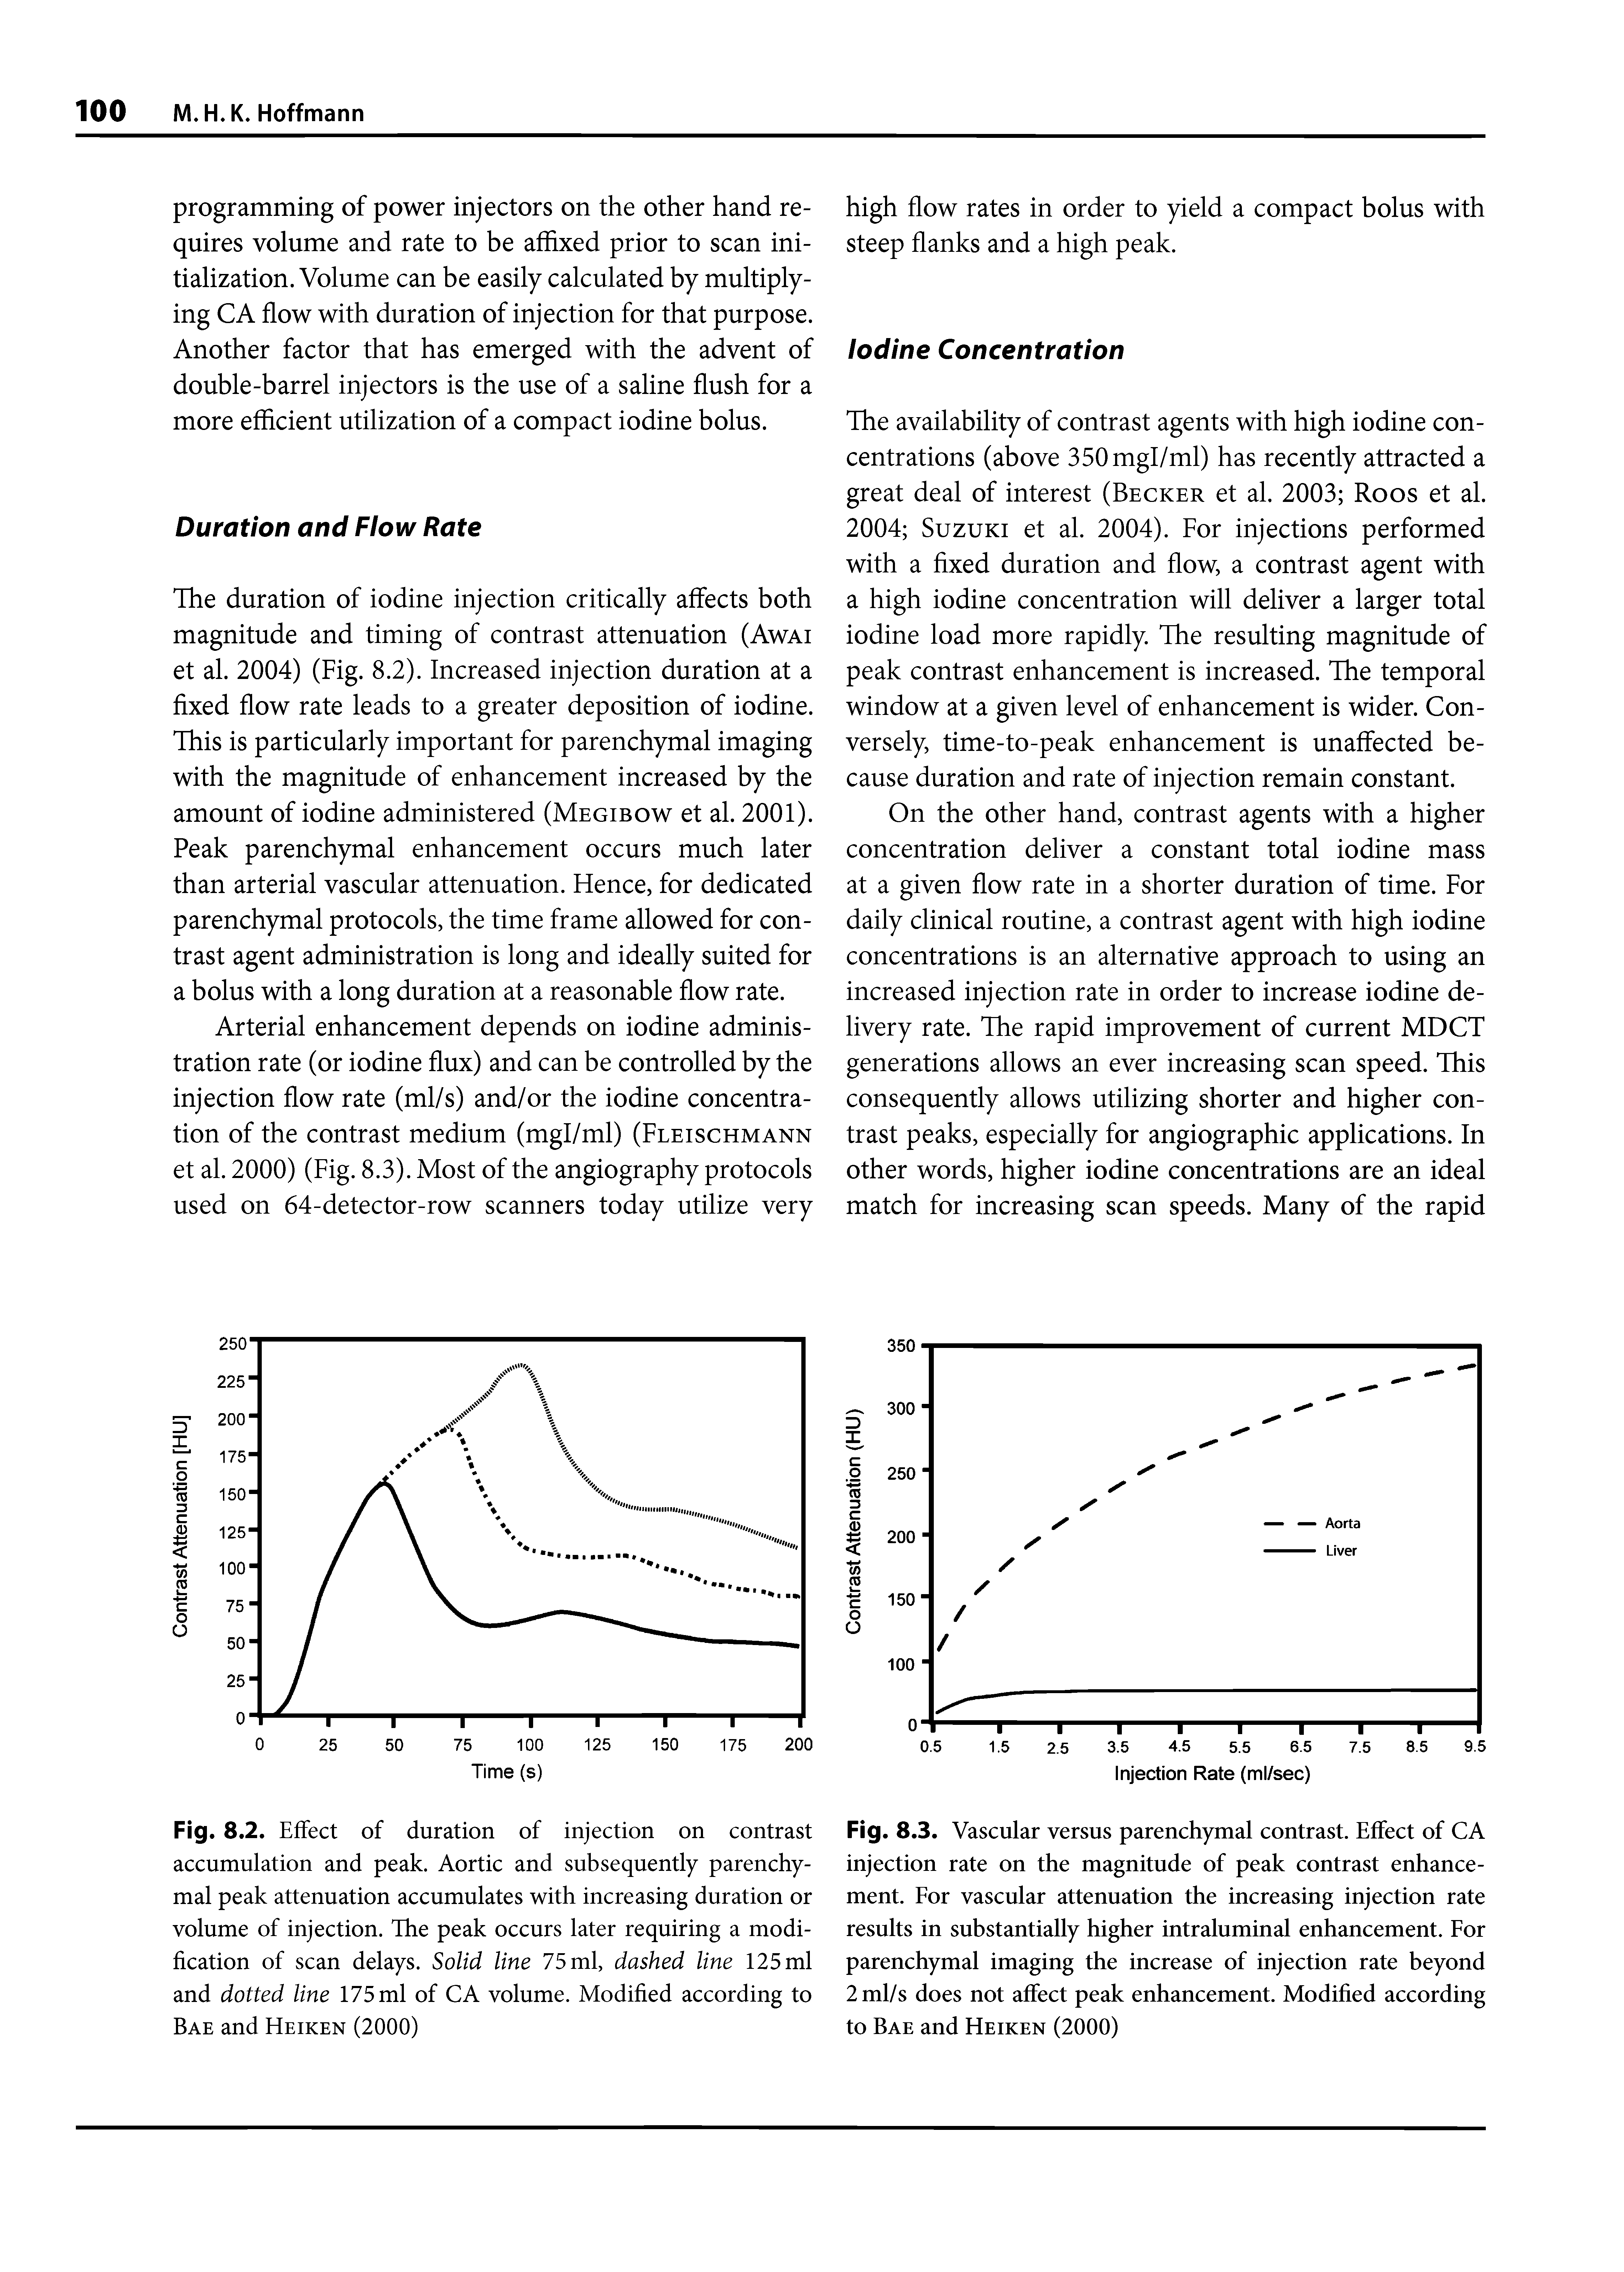 Fig. 8.2. Effect of duration of injection on contrast accumulation and peak. Aortic and subsequently parenchymal peak attenuation accumulates with increasing duration or volume of injection. The peak occurs later requiring a modification of scan delays. Solid line 75 ml, dashed line 125 ml and dotted line 175 ml of CA volume. Modified according to Bae and Heiken (2000)...